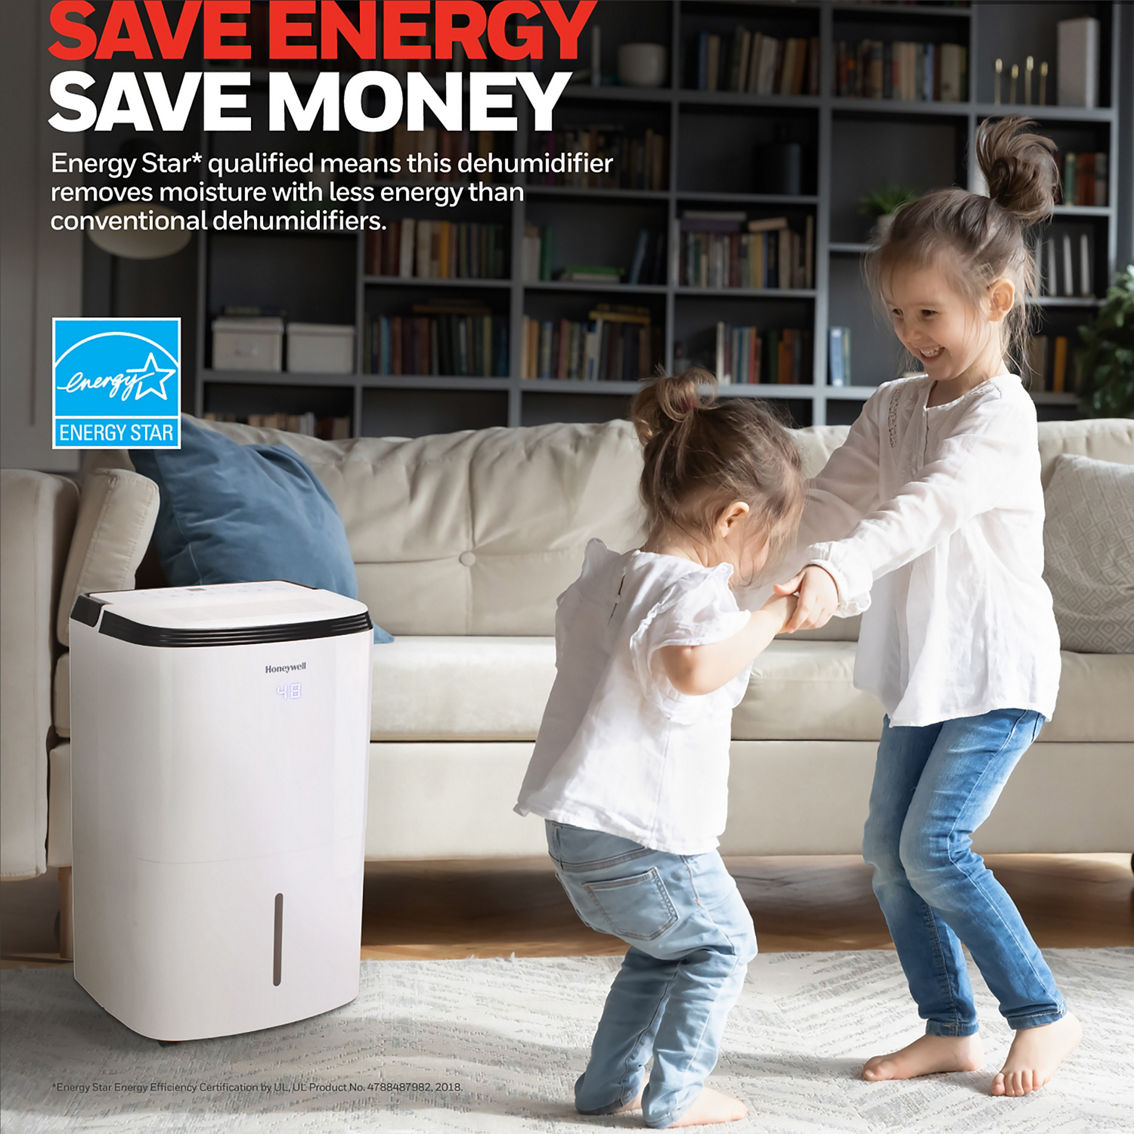 Honeywell 30 Pint Energy Star Dehumidifier with Washable Filter - Image 2 of 6